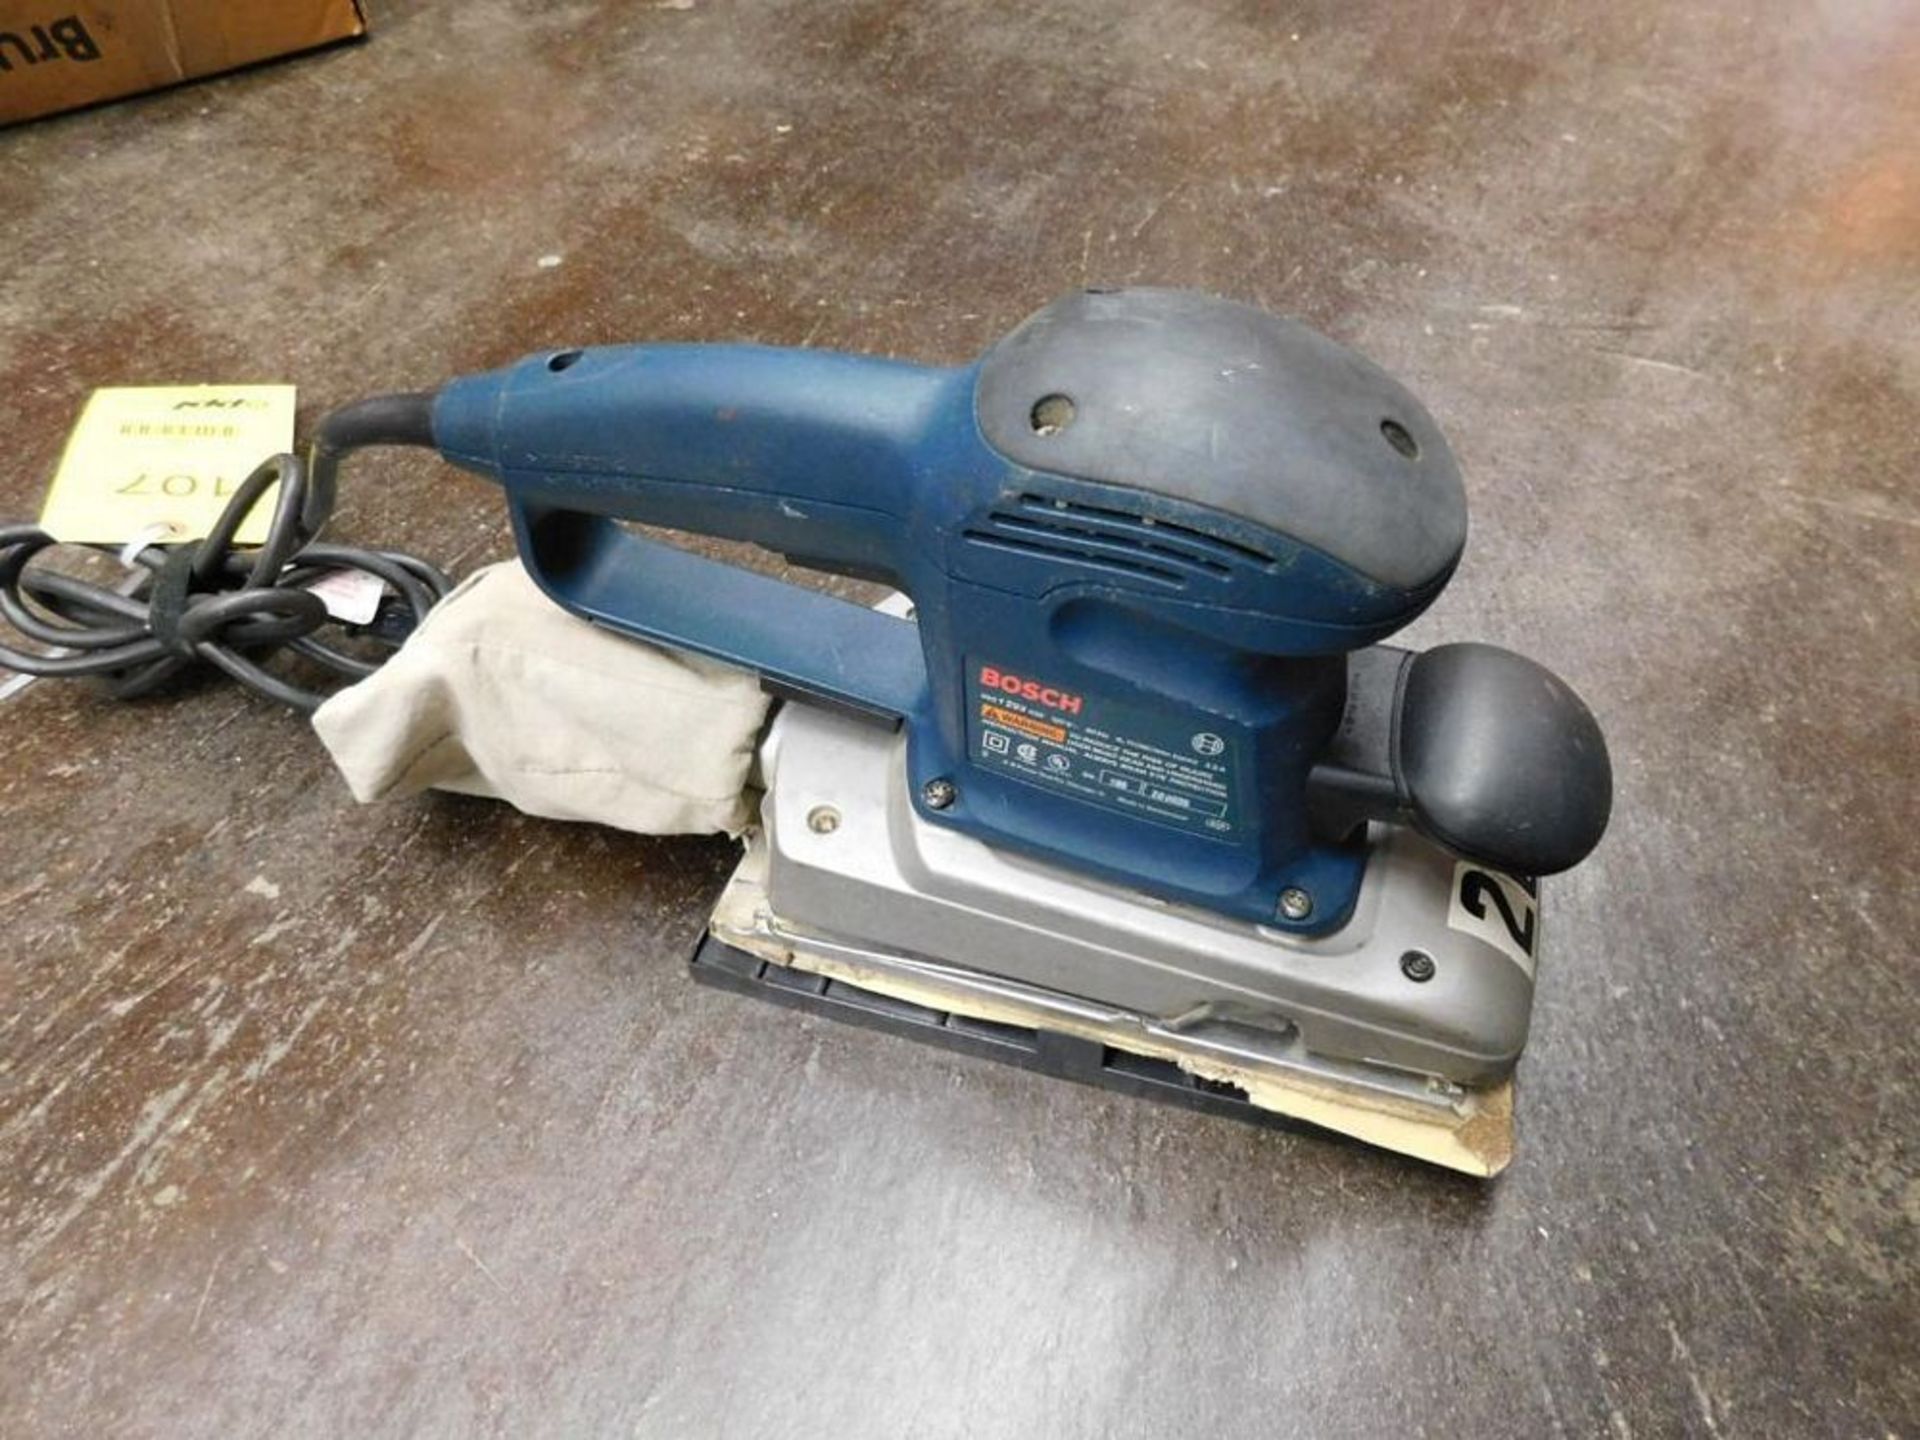 Bosch 1293 Sander w/Dust Collection Bag (LOCATION: 318 N. Milwaukee Ave., Wheeling, IL 60090) - Image 2 of 4